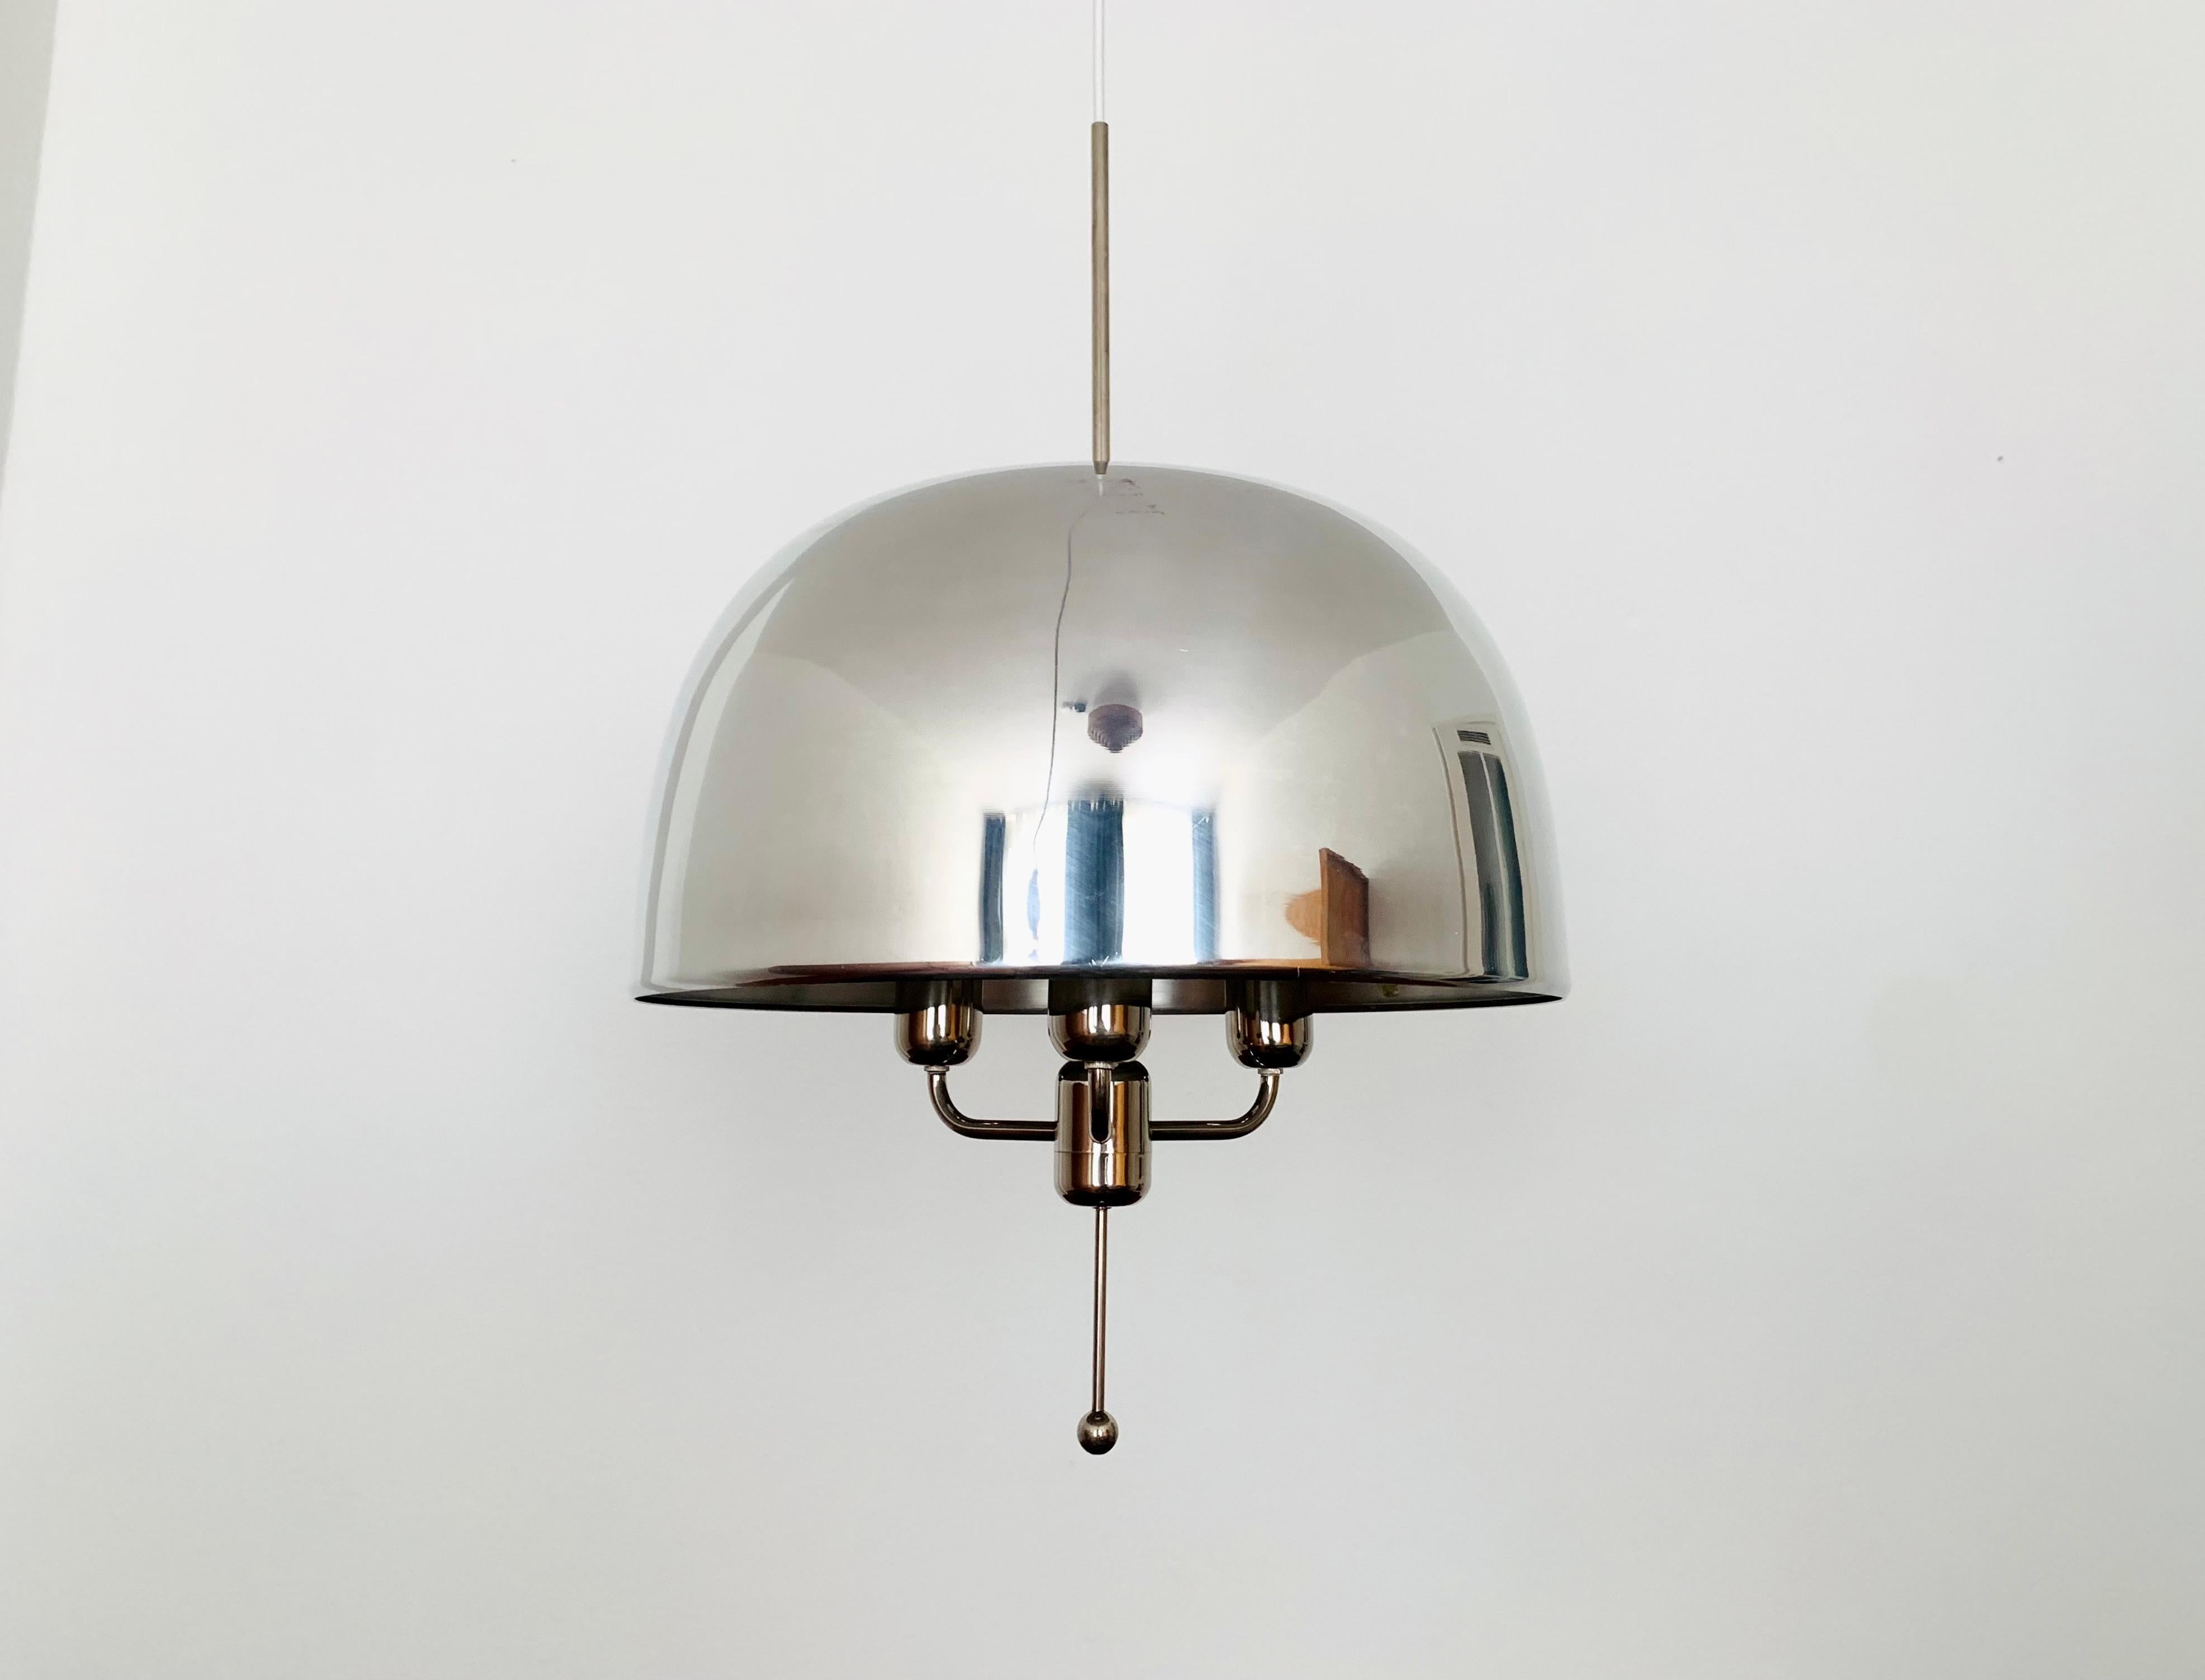 Wonderful and very rare Swedish pendant lamp from the 1960s.
The lamp with the floating shade is a real asset and an absolute favorite for every home.
A very pleasant and warm light is created.

Manufacturer: Markaryd AB Ellysett
Design: Hans